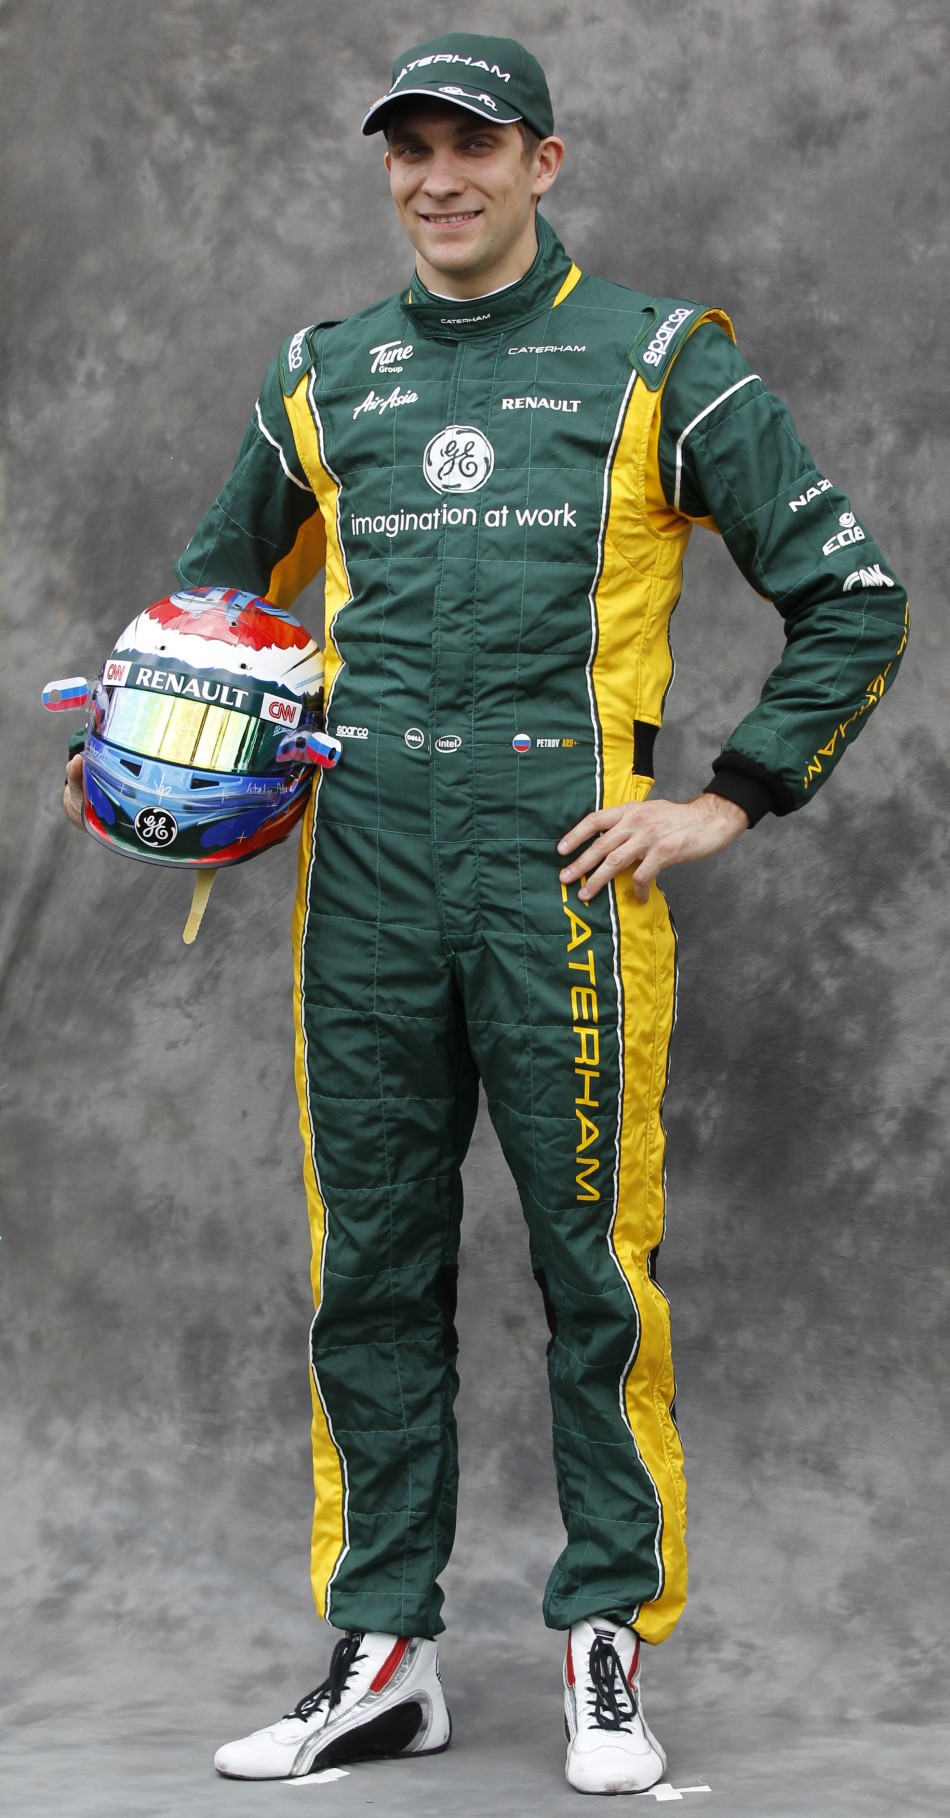 Renault Formula One driver Petrov poses prior to the Australian F1 Grand Prix at the Albert Park circuit in Melbourne